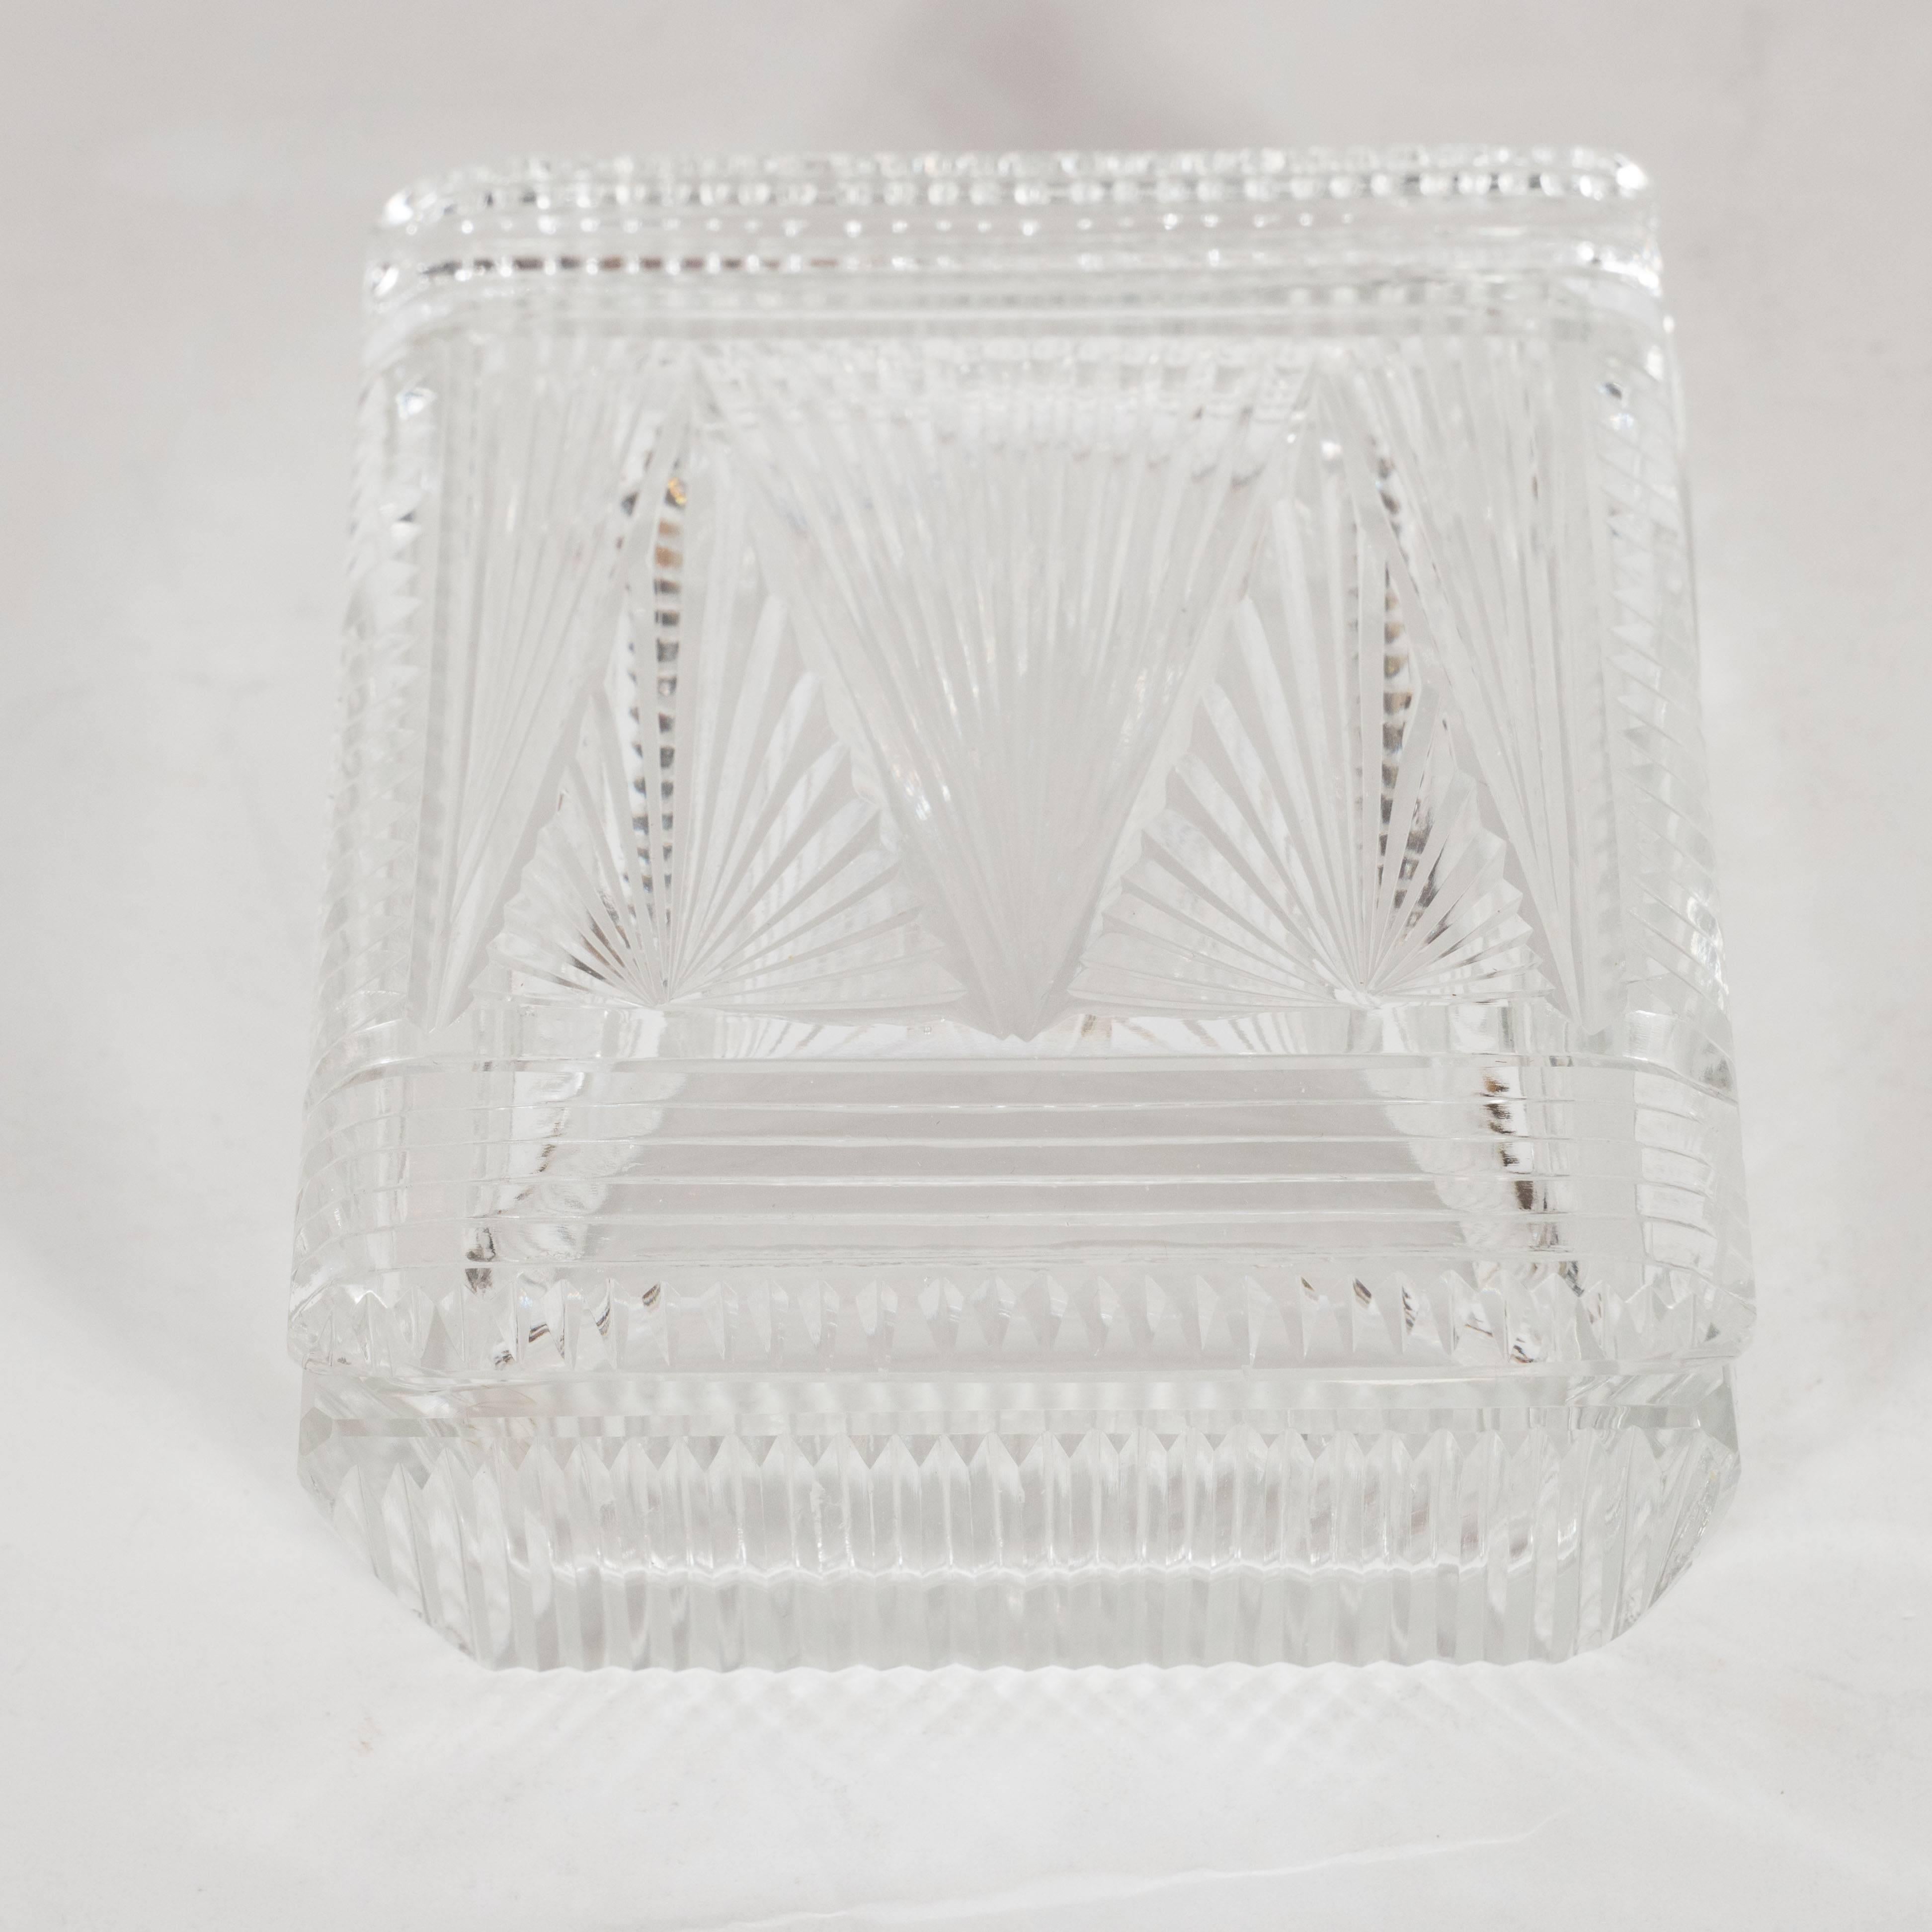 This exquisite Art Deco box was handblown and etched in Czechoslovakia- a country renowned for its superlative glass production during this period circa 1935. The top features three starburst etched isosceles triangles in the center flanked on each